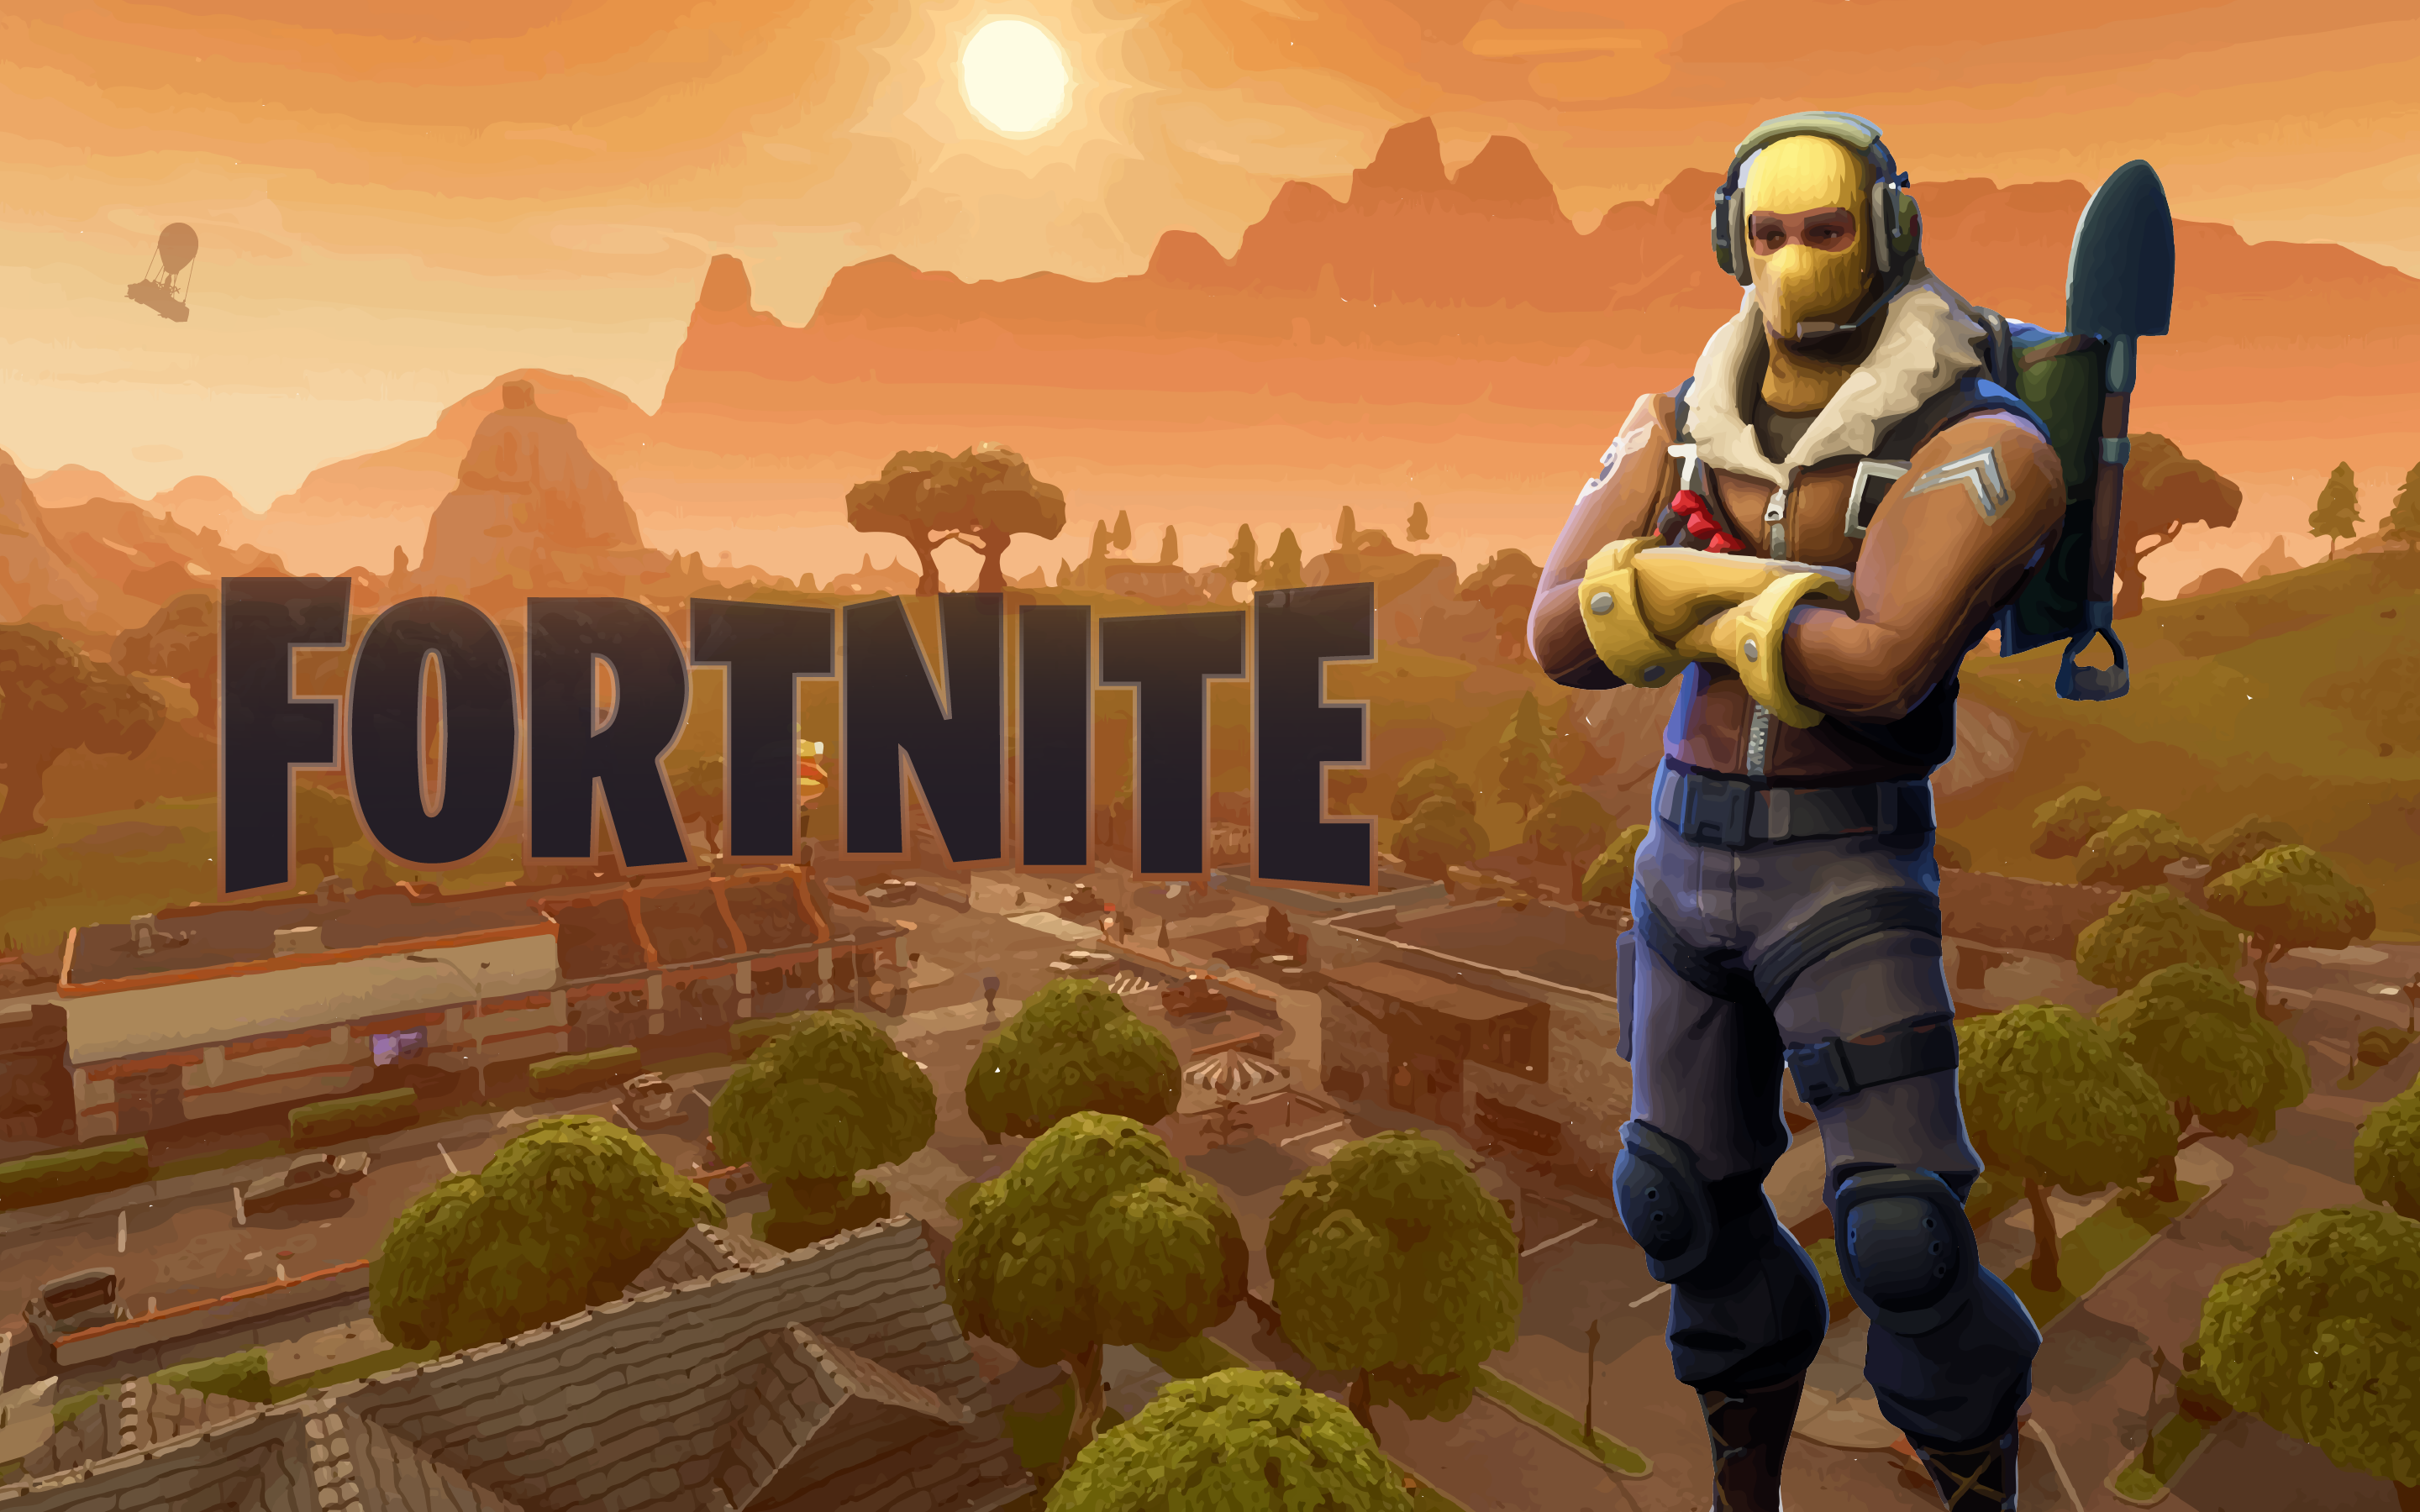 Indefinite Ban for Controversial Fortnite Streamer Over Inappropriate Comments